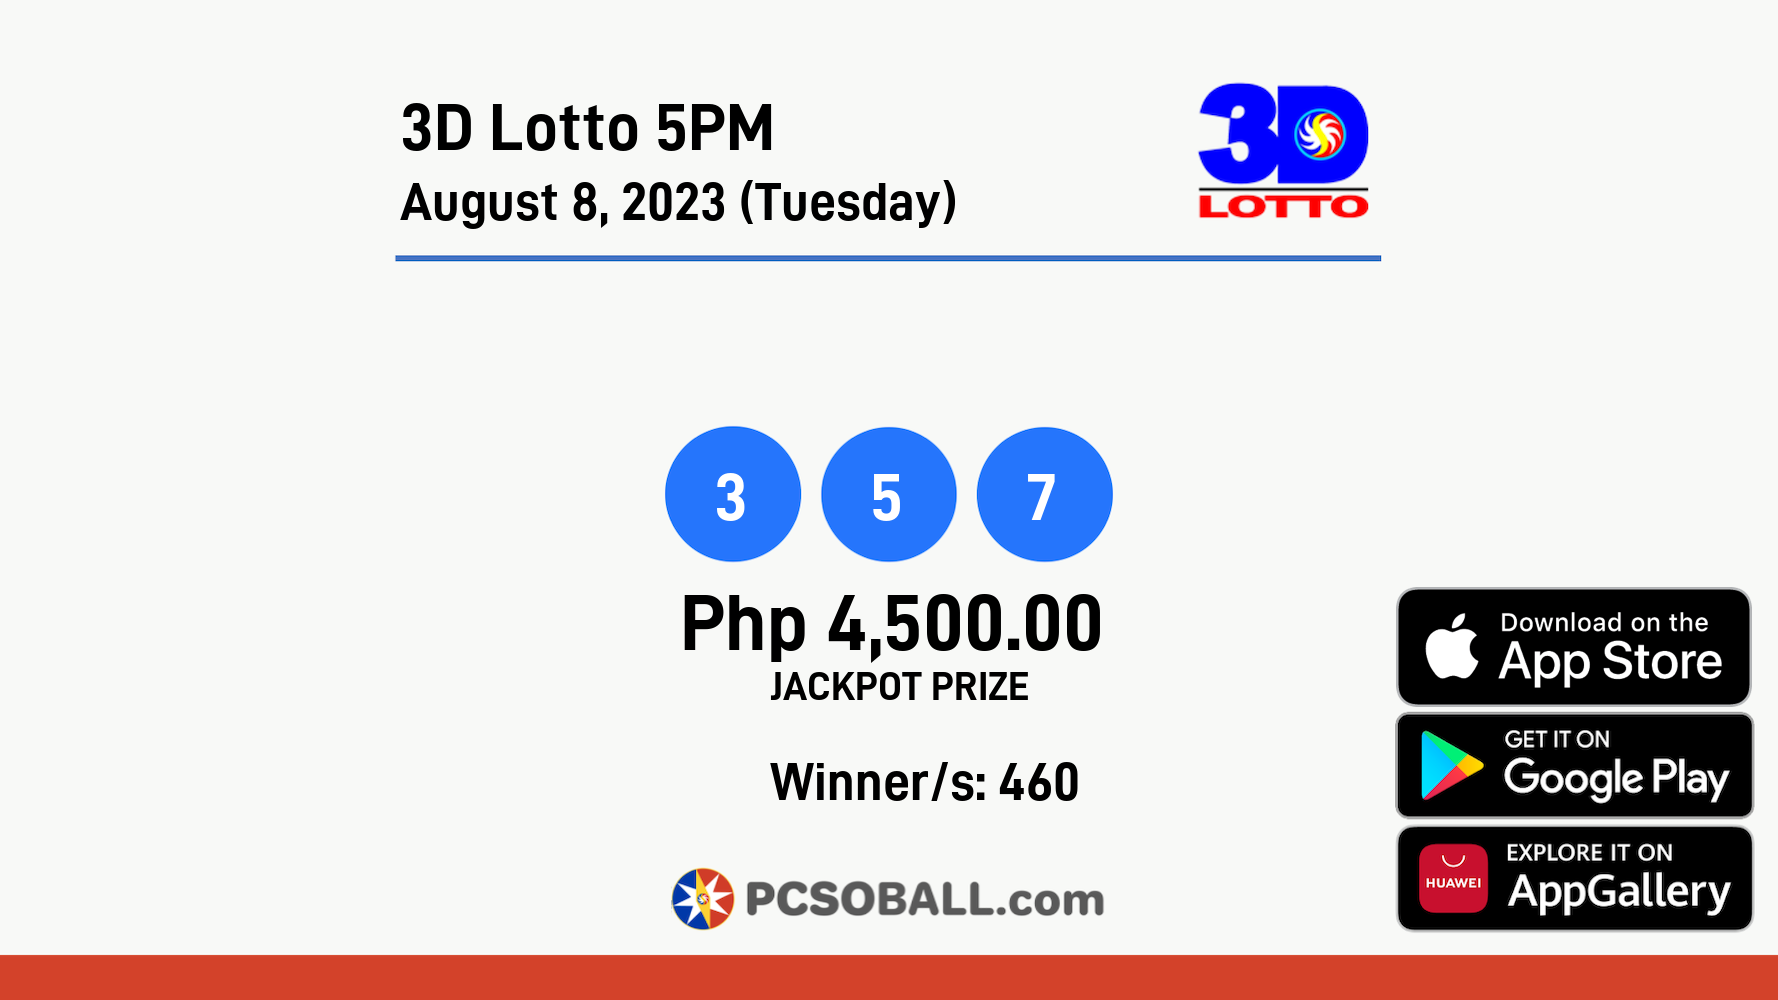 3D Lotto 5PM August 8, 2023 (Tuesday) Result